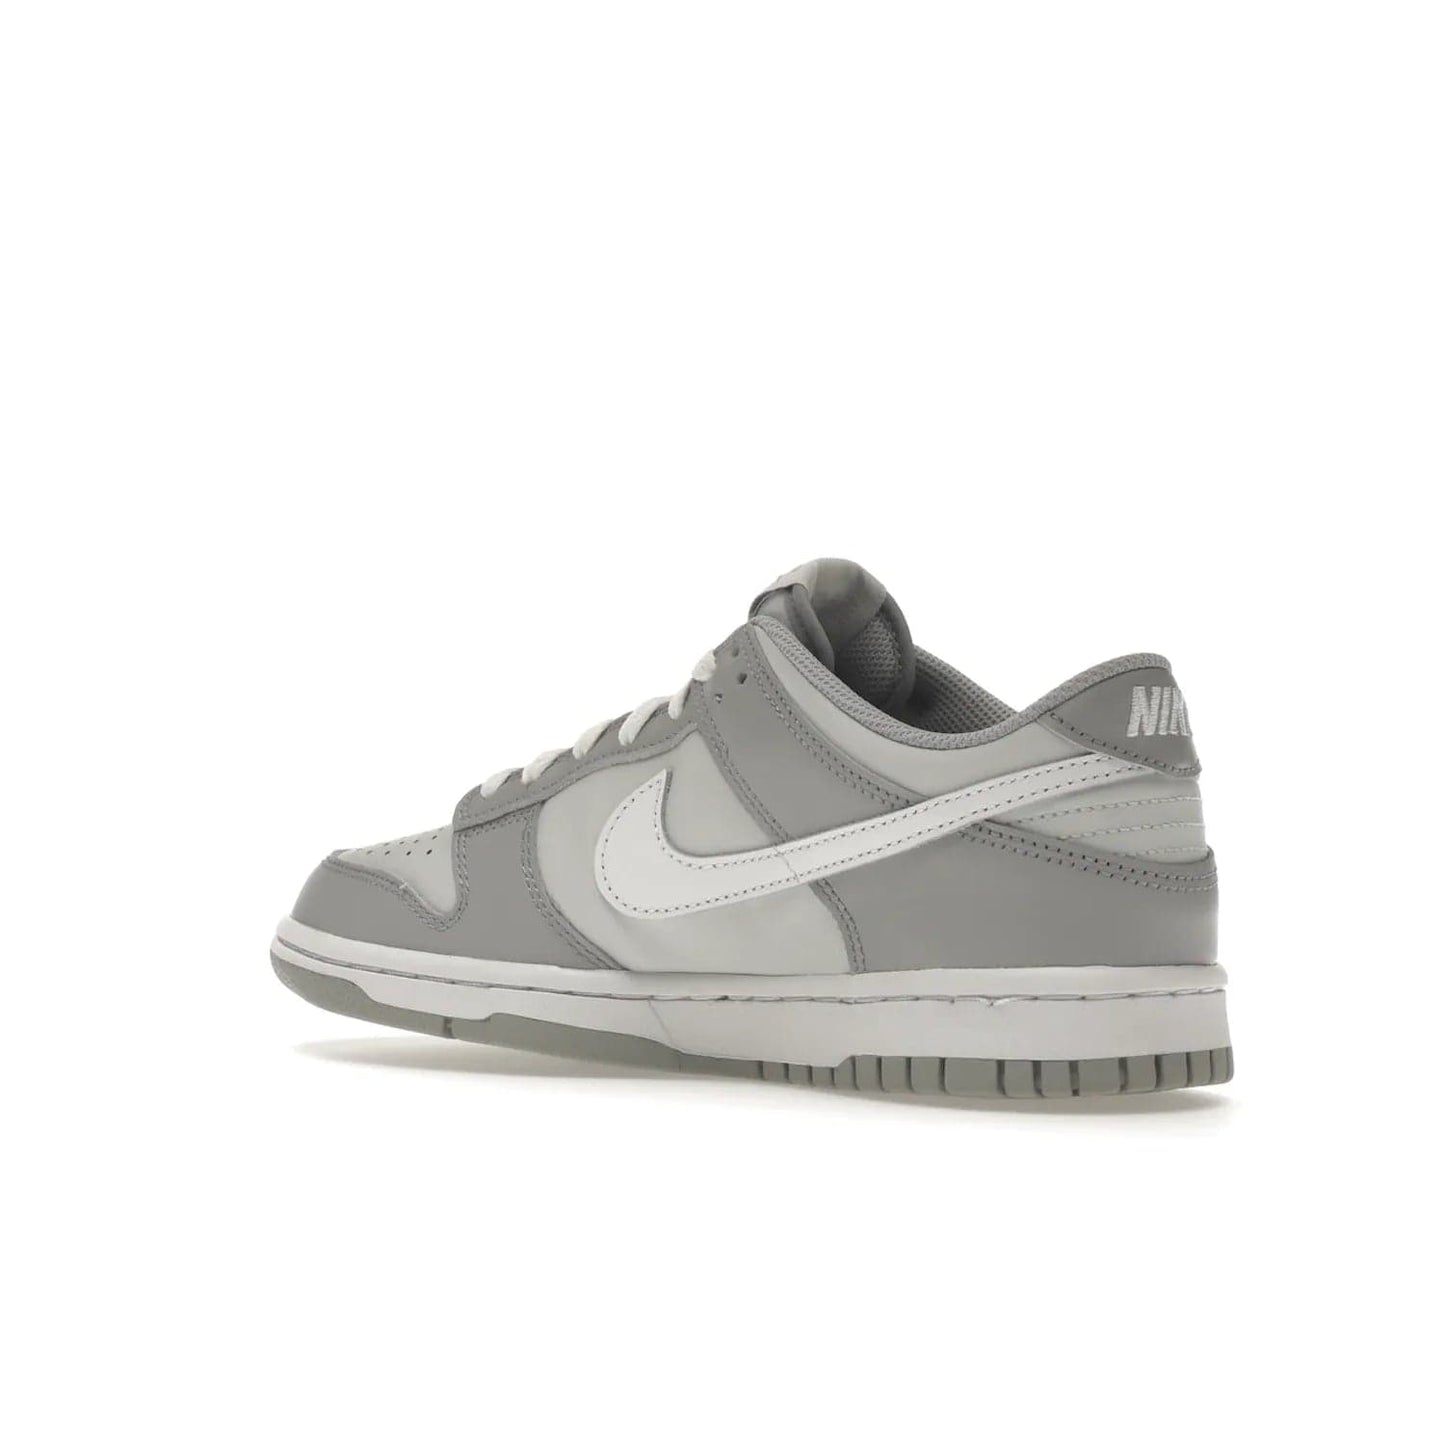 Nike Dunk Low Two-Toned Grey (GS) - Image 23 - Only at www.BallersClubKickz.com - Stylish Nike Dunk Low GS Two-Toned Grey featuring leather build, light/dark grey shades, white Swoosh logo & gray rubber outsole. Get ready to make a statement with this timeless classic released in March 2022.